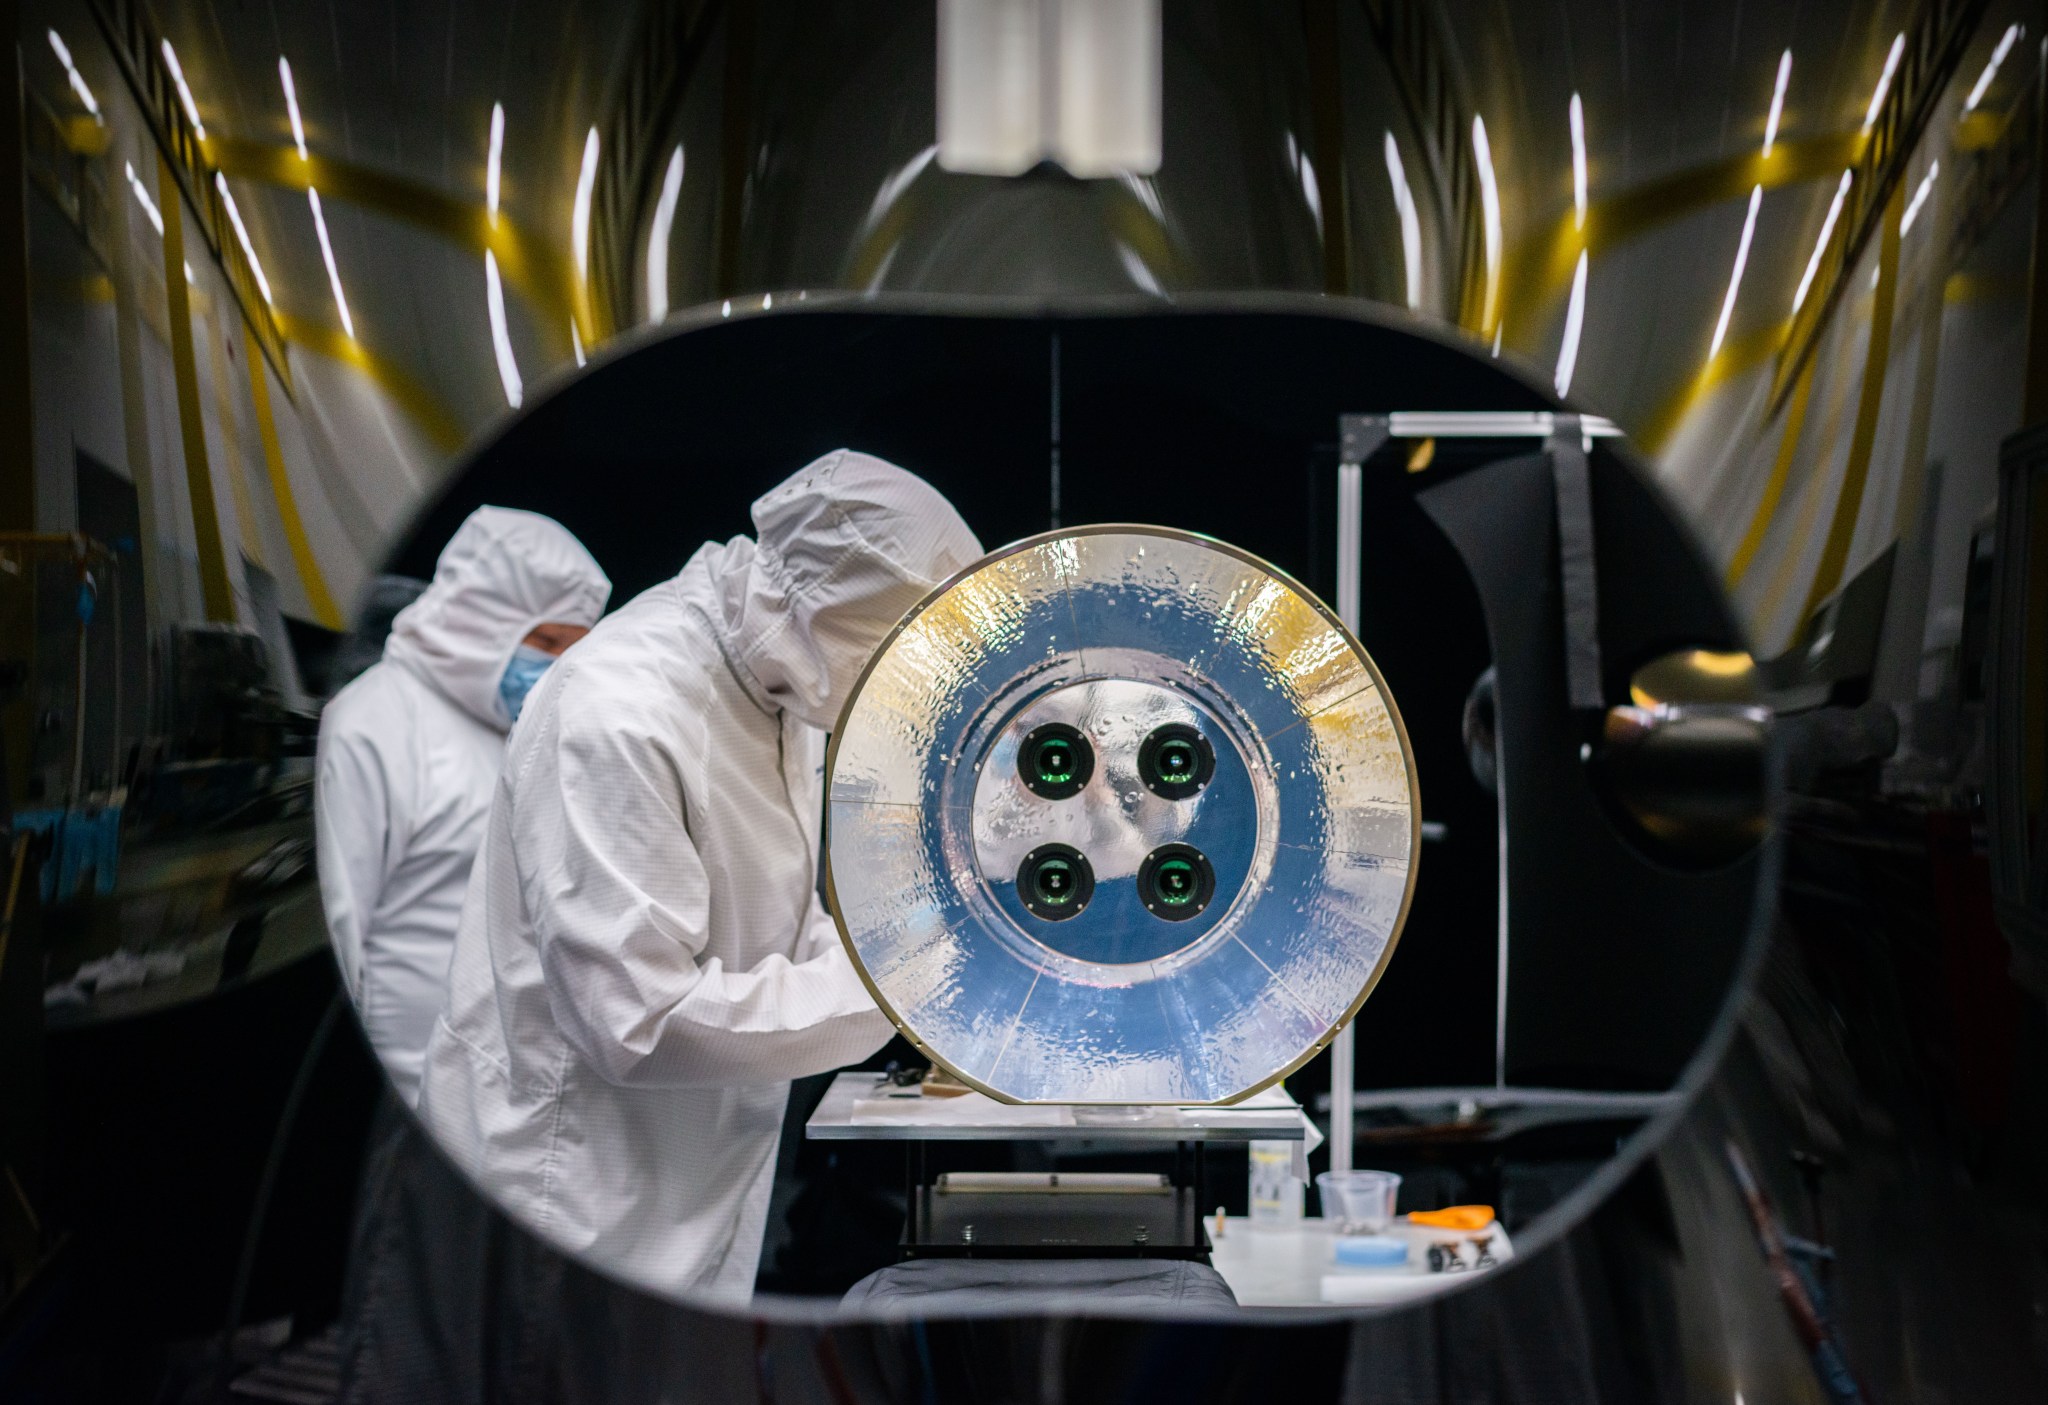 Two scientists wearing white lab coats, hoods, and masks work behind a large reflective disc with four camera lenses in its center, part of the assembly for the AWE.